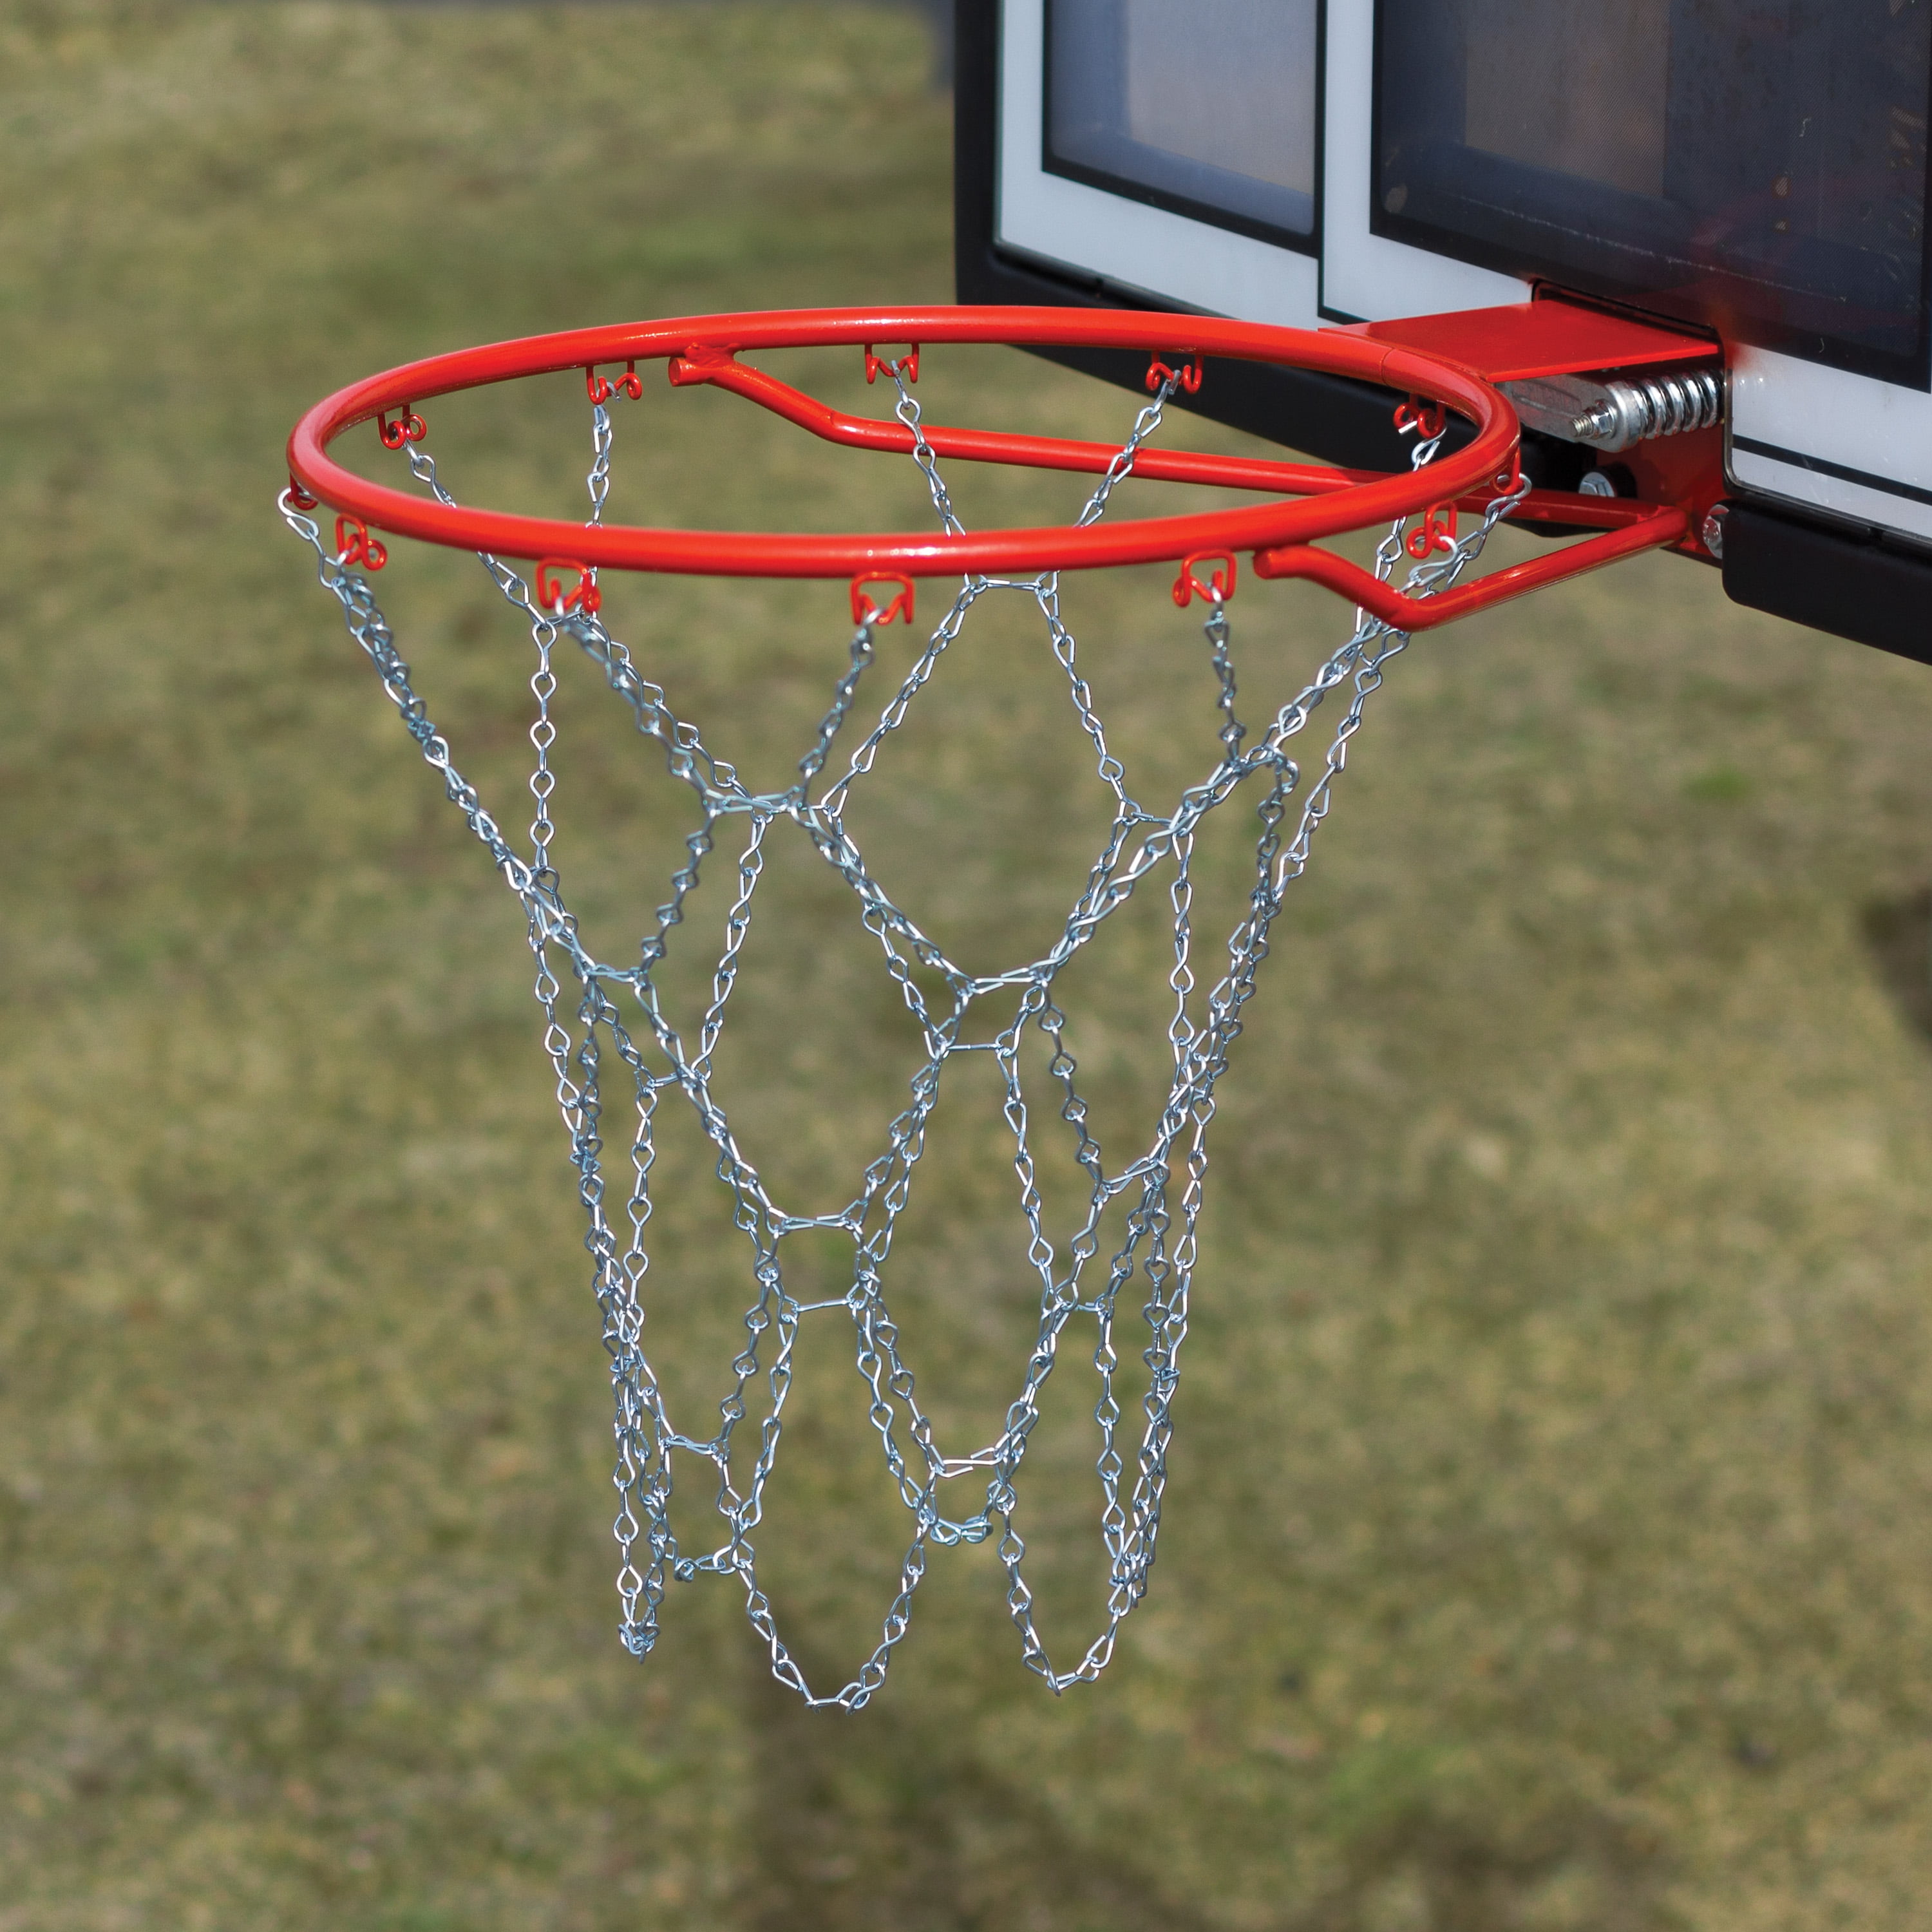 Basketball chain net zinc pltd steel hand crafted Awesome Black link design 